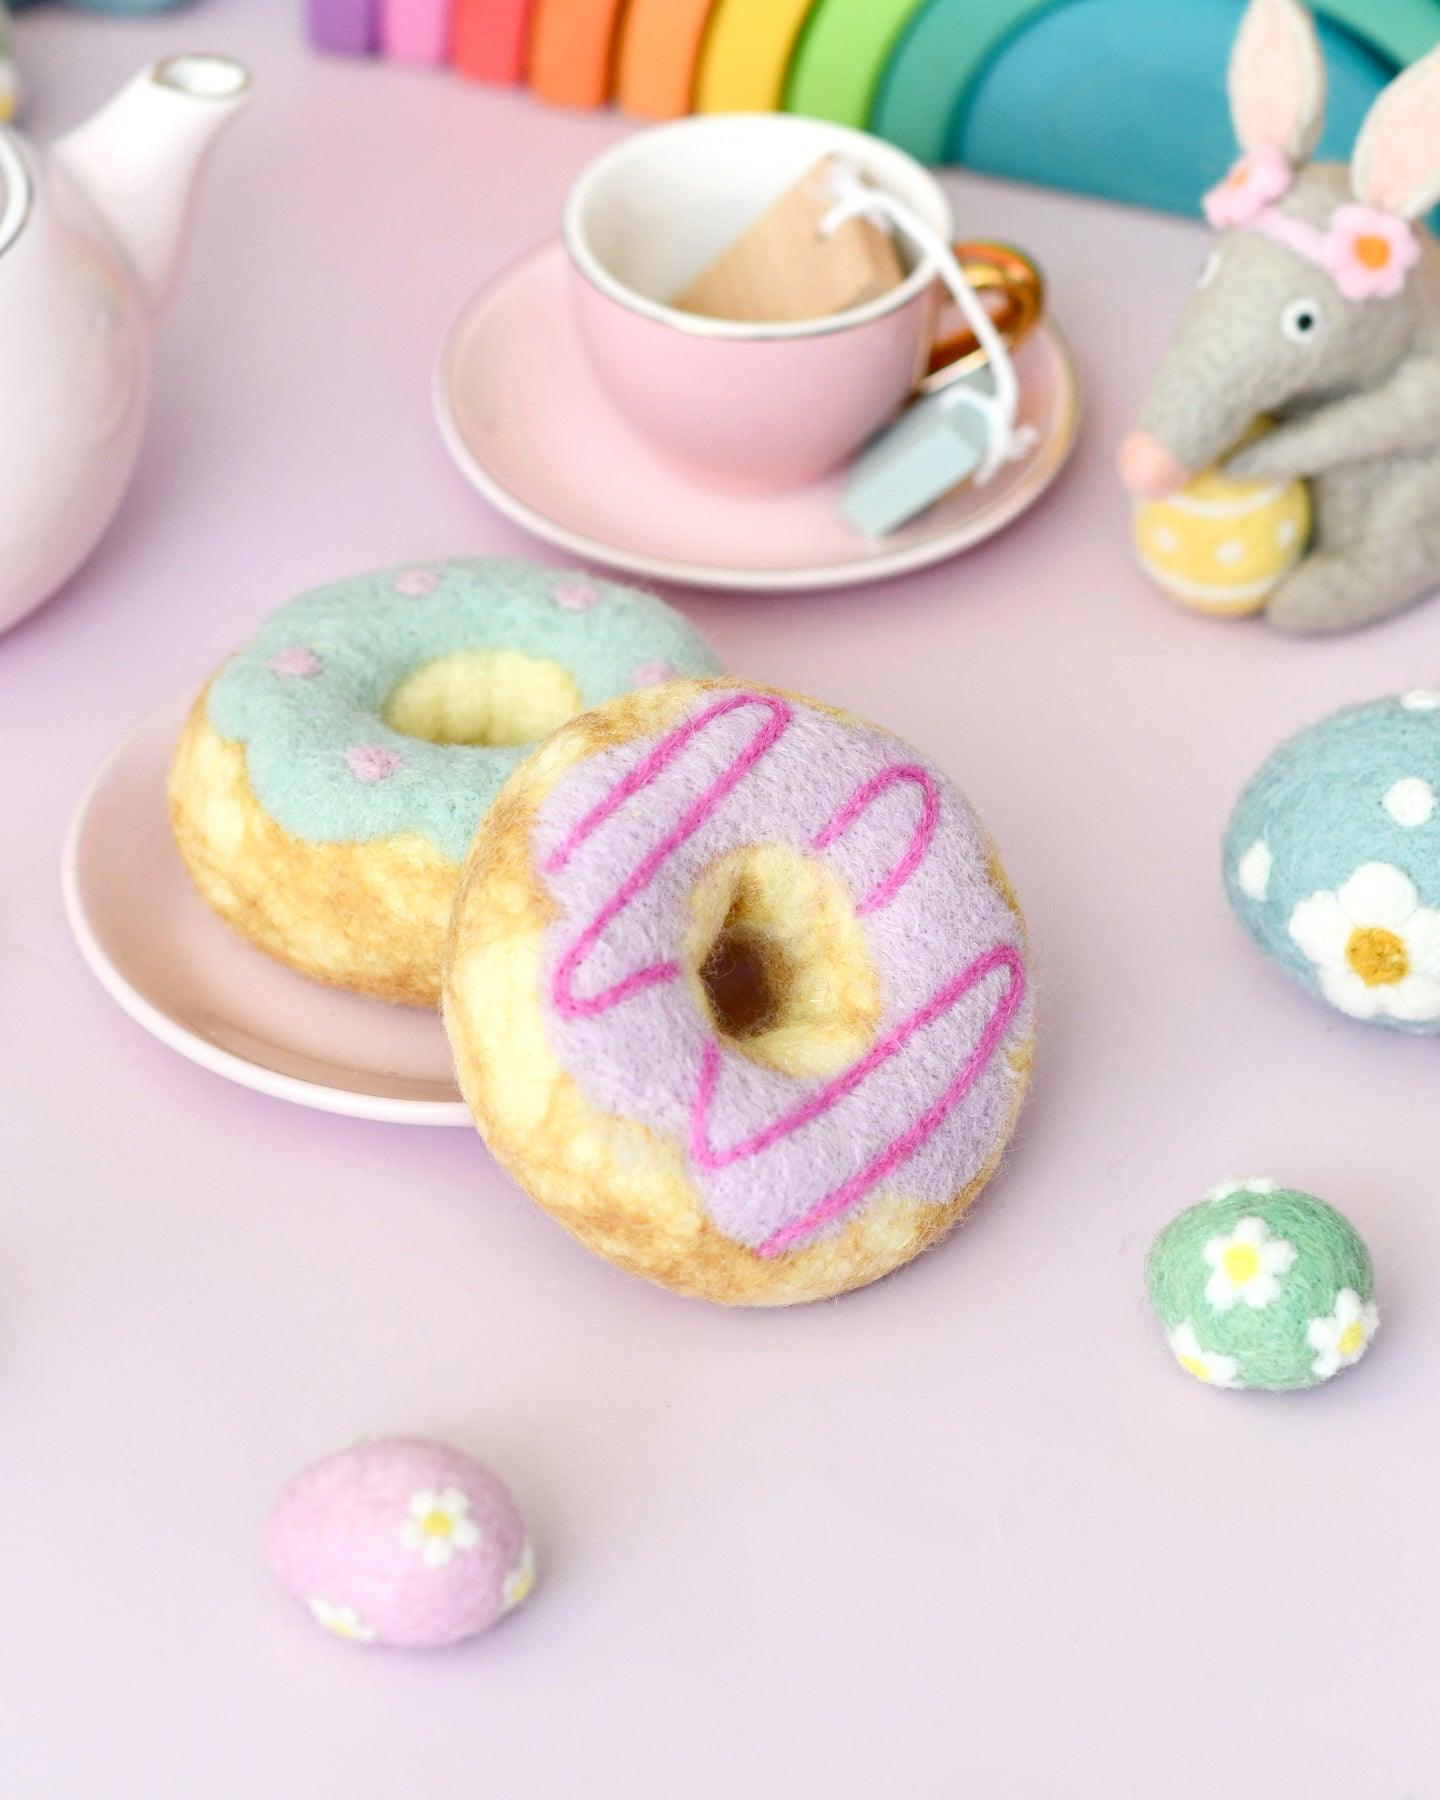 Felt Doughnut (Donut) with Pastel Frosting and Pink Drizzle - Tara Treasures